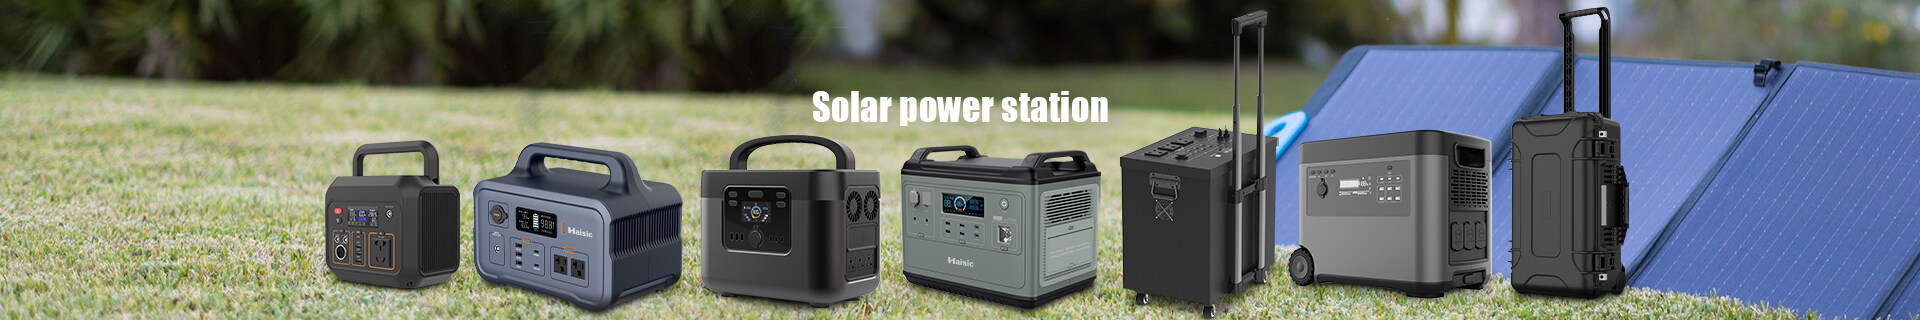 portable solar power system for camping